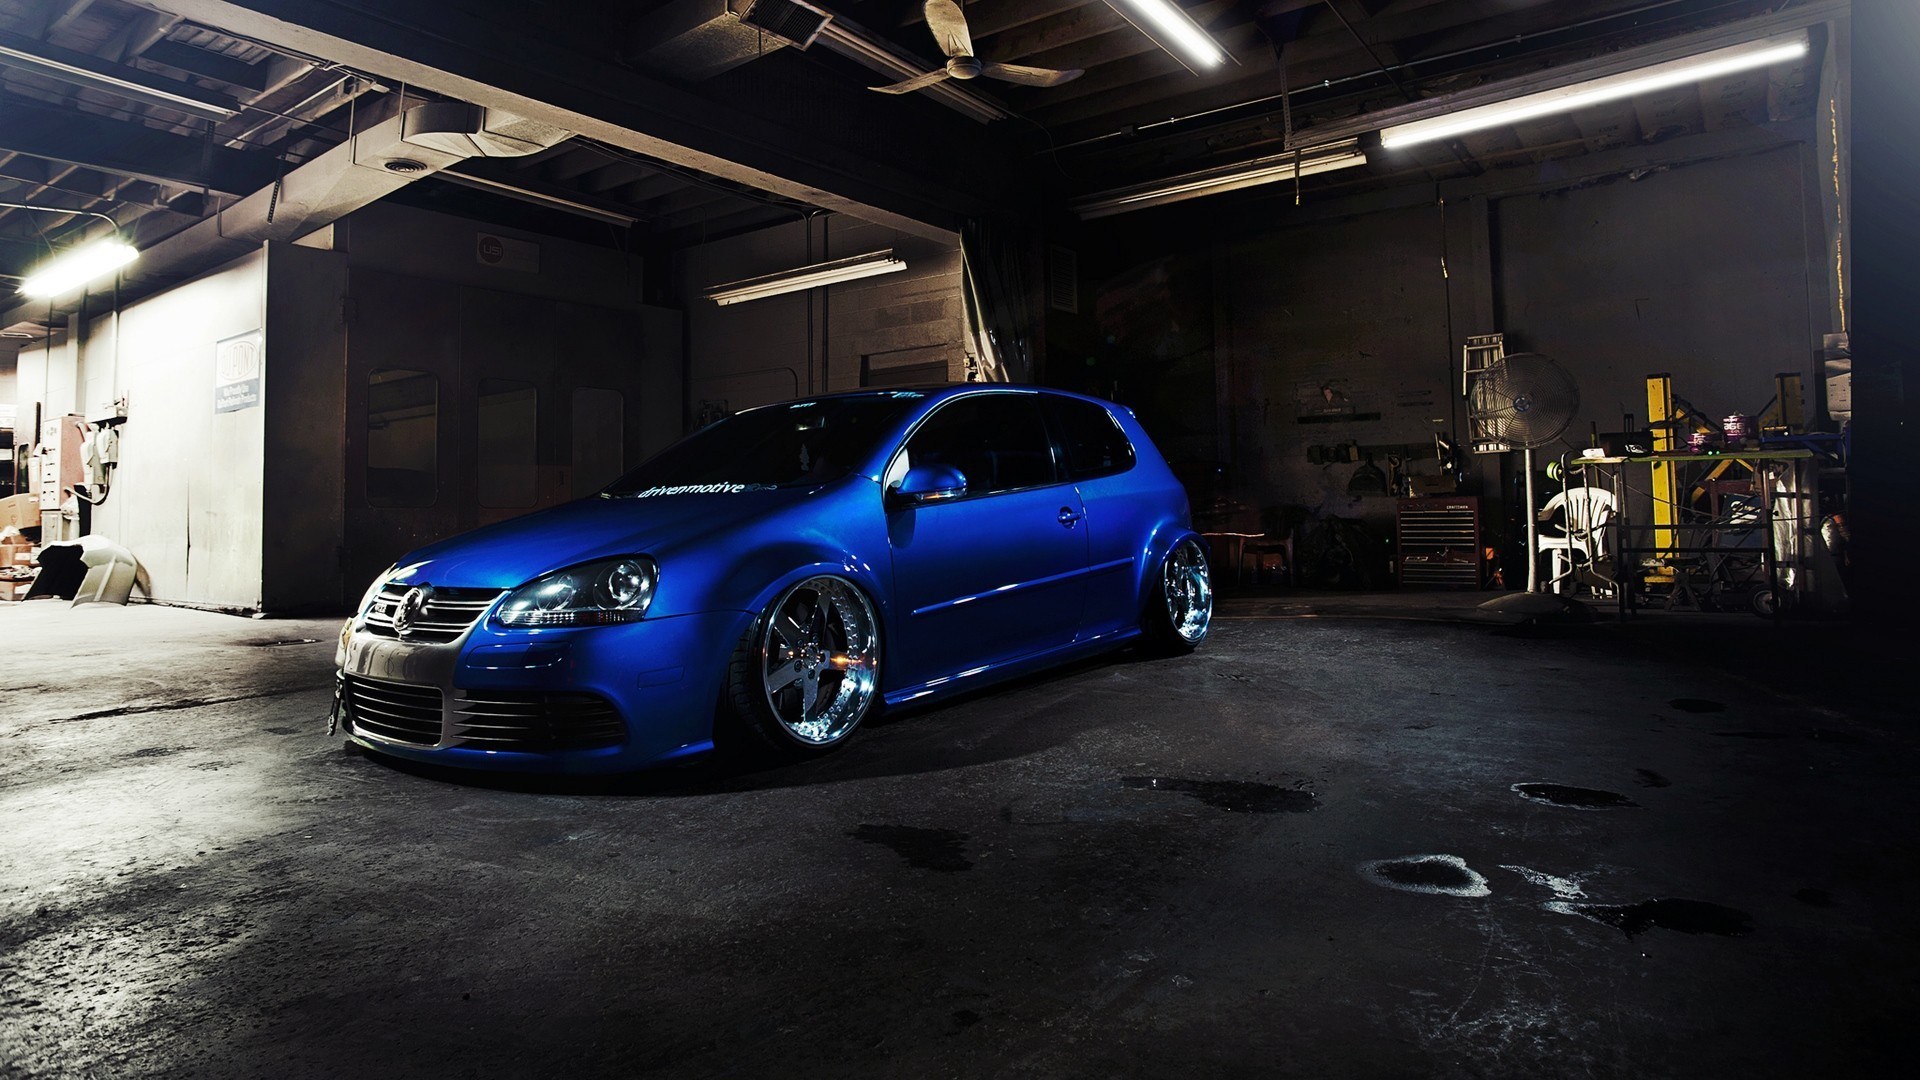 Volkswagen Golf R32 Photo Pictures In High Definition Or Widescreen